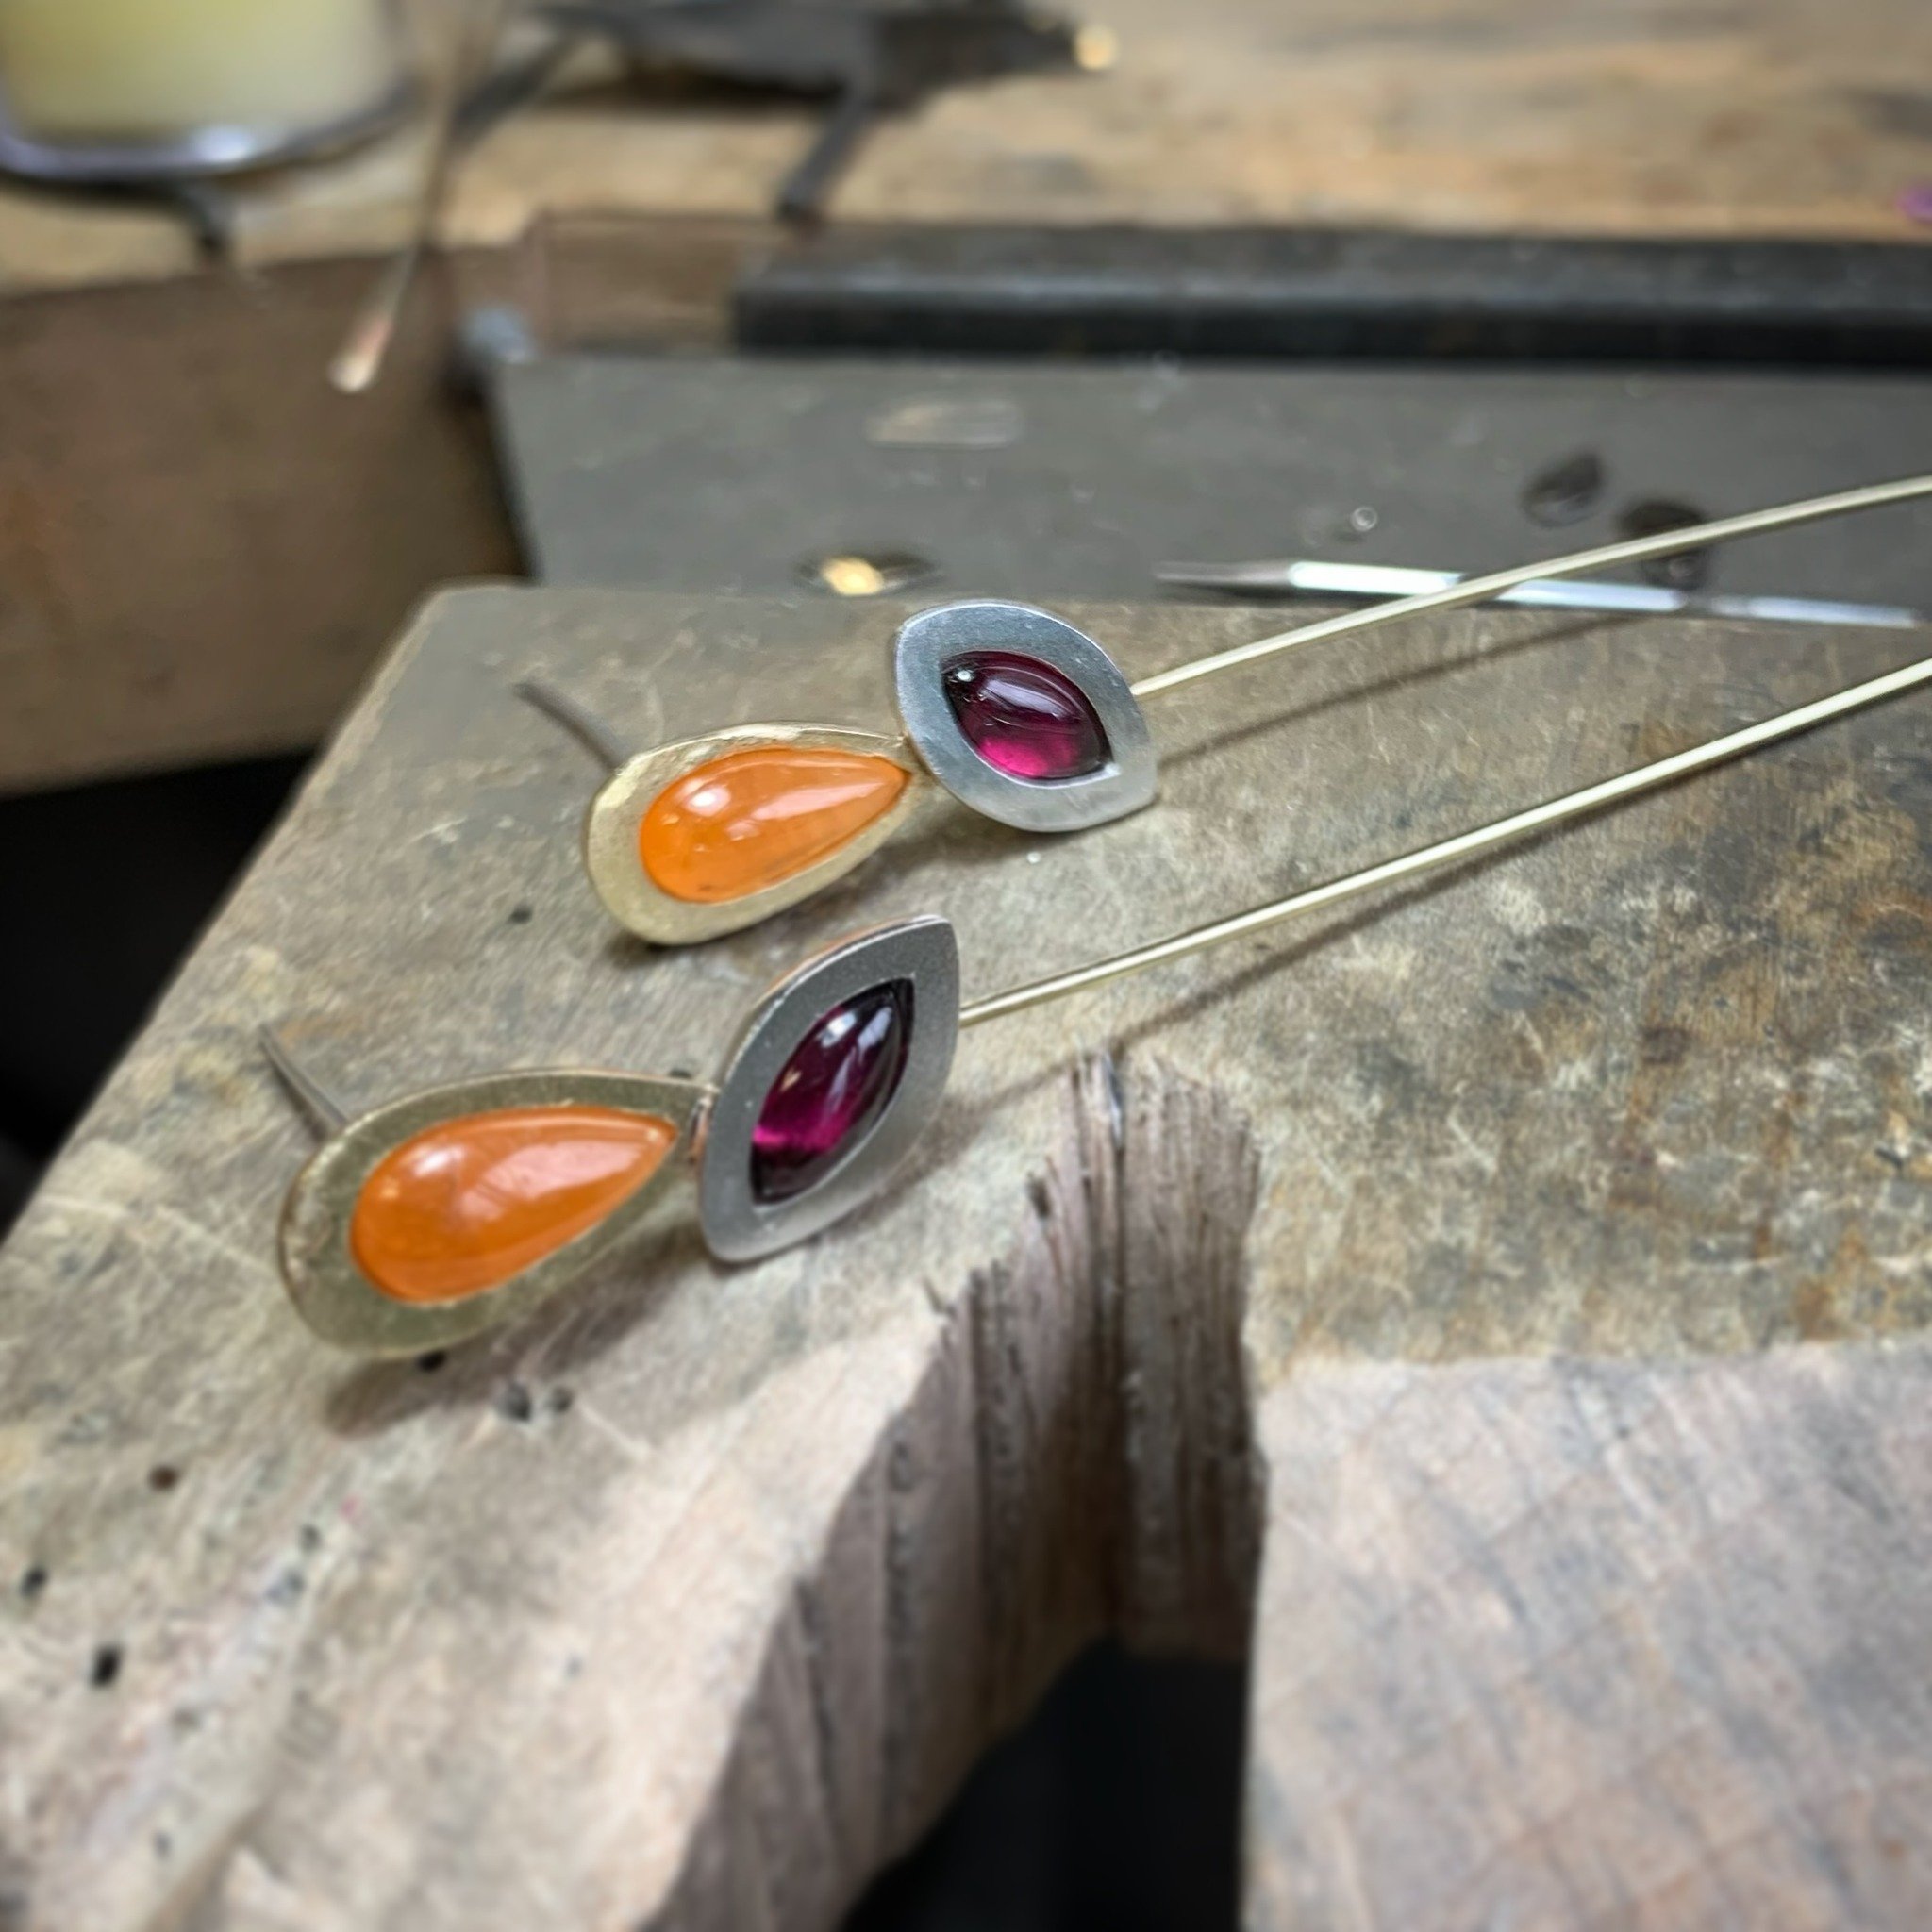 Last pair of new drop earrings on the bench, then I&rsquo;ll be packing my bags and having a little down time before heading to @craftinfocus RHS Wisley show on Wednesday. We will be welcoming visitors from Thursday 2nd to Monday 6th - hope you can c